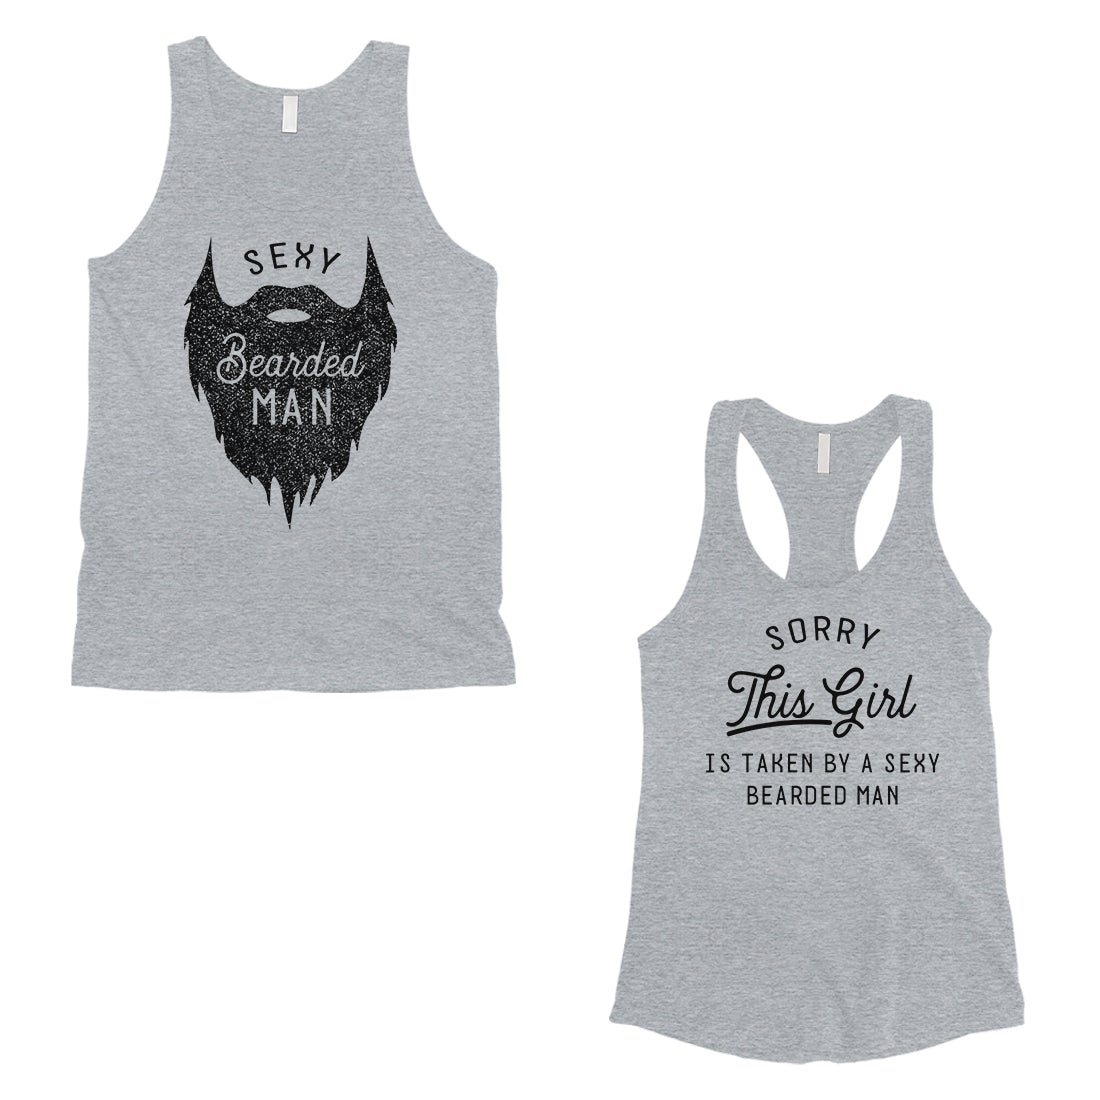 Taken By Sexy Bearded Man Matching Couple Tank Tops Valentine's Day Gray